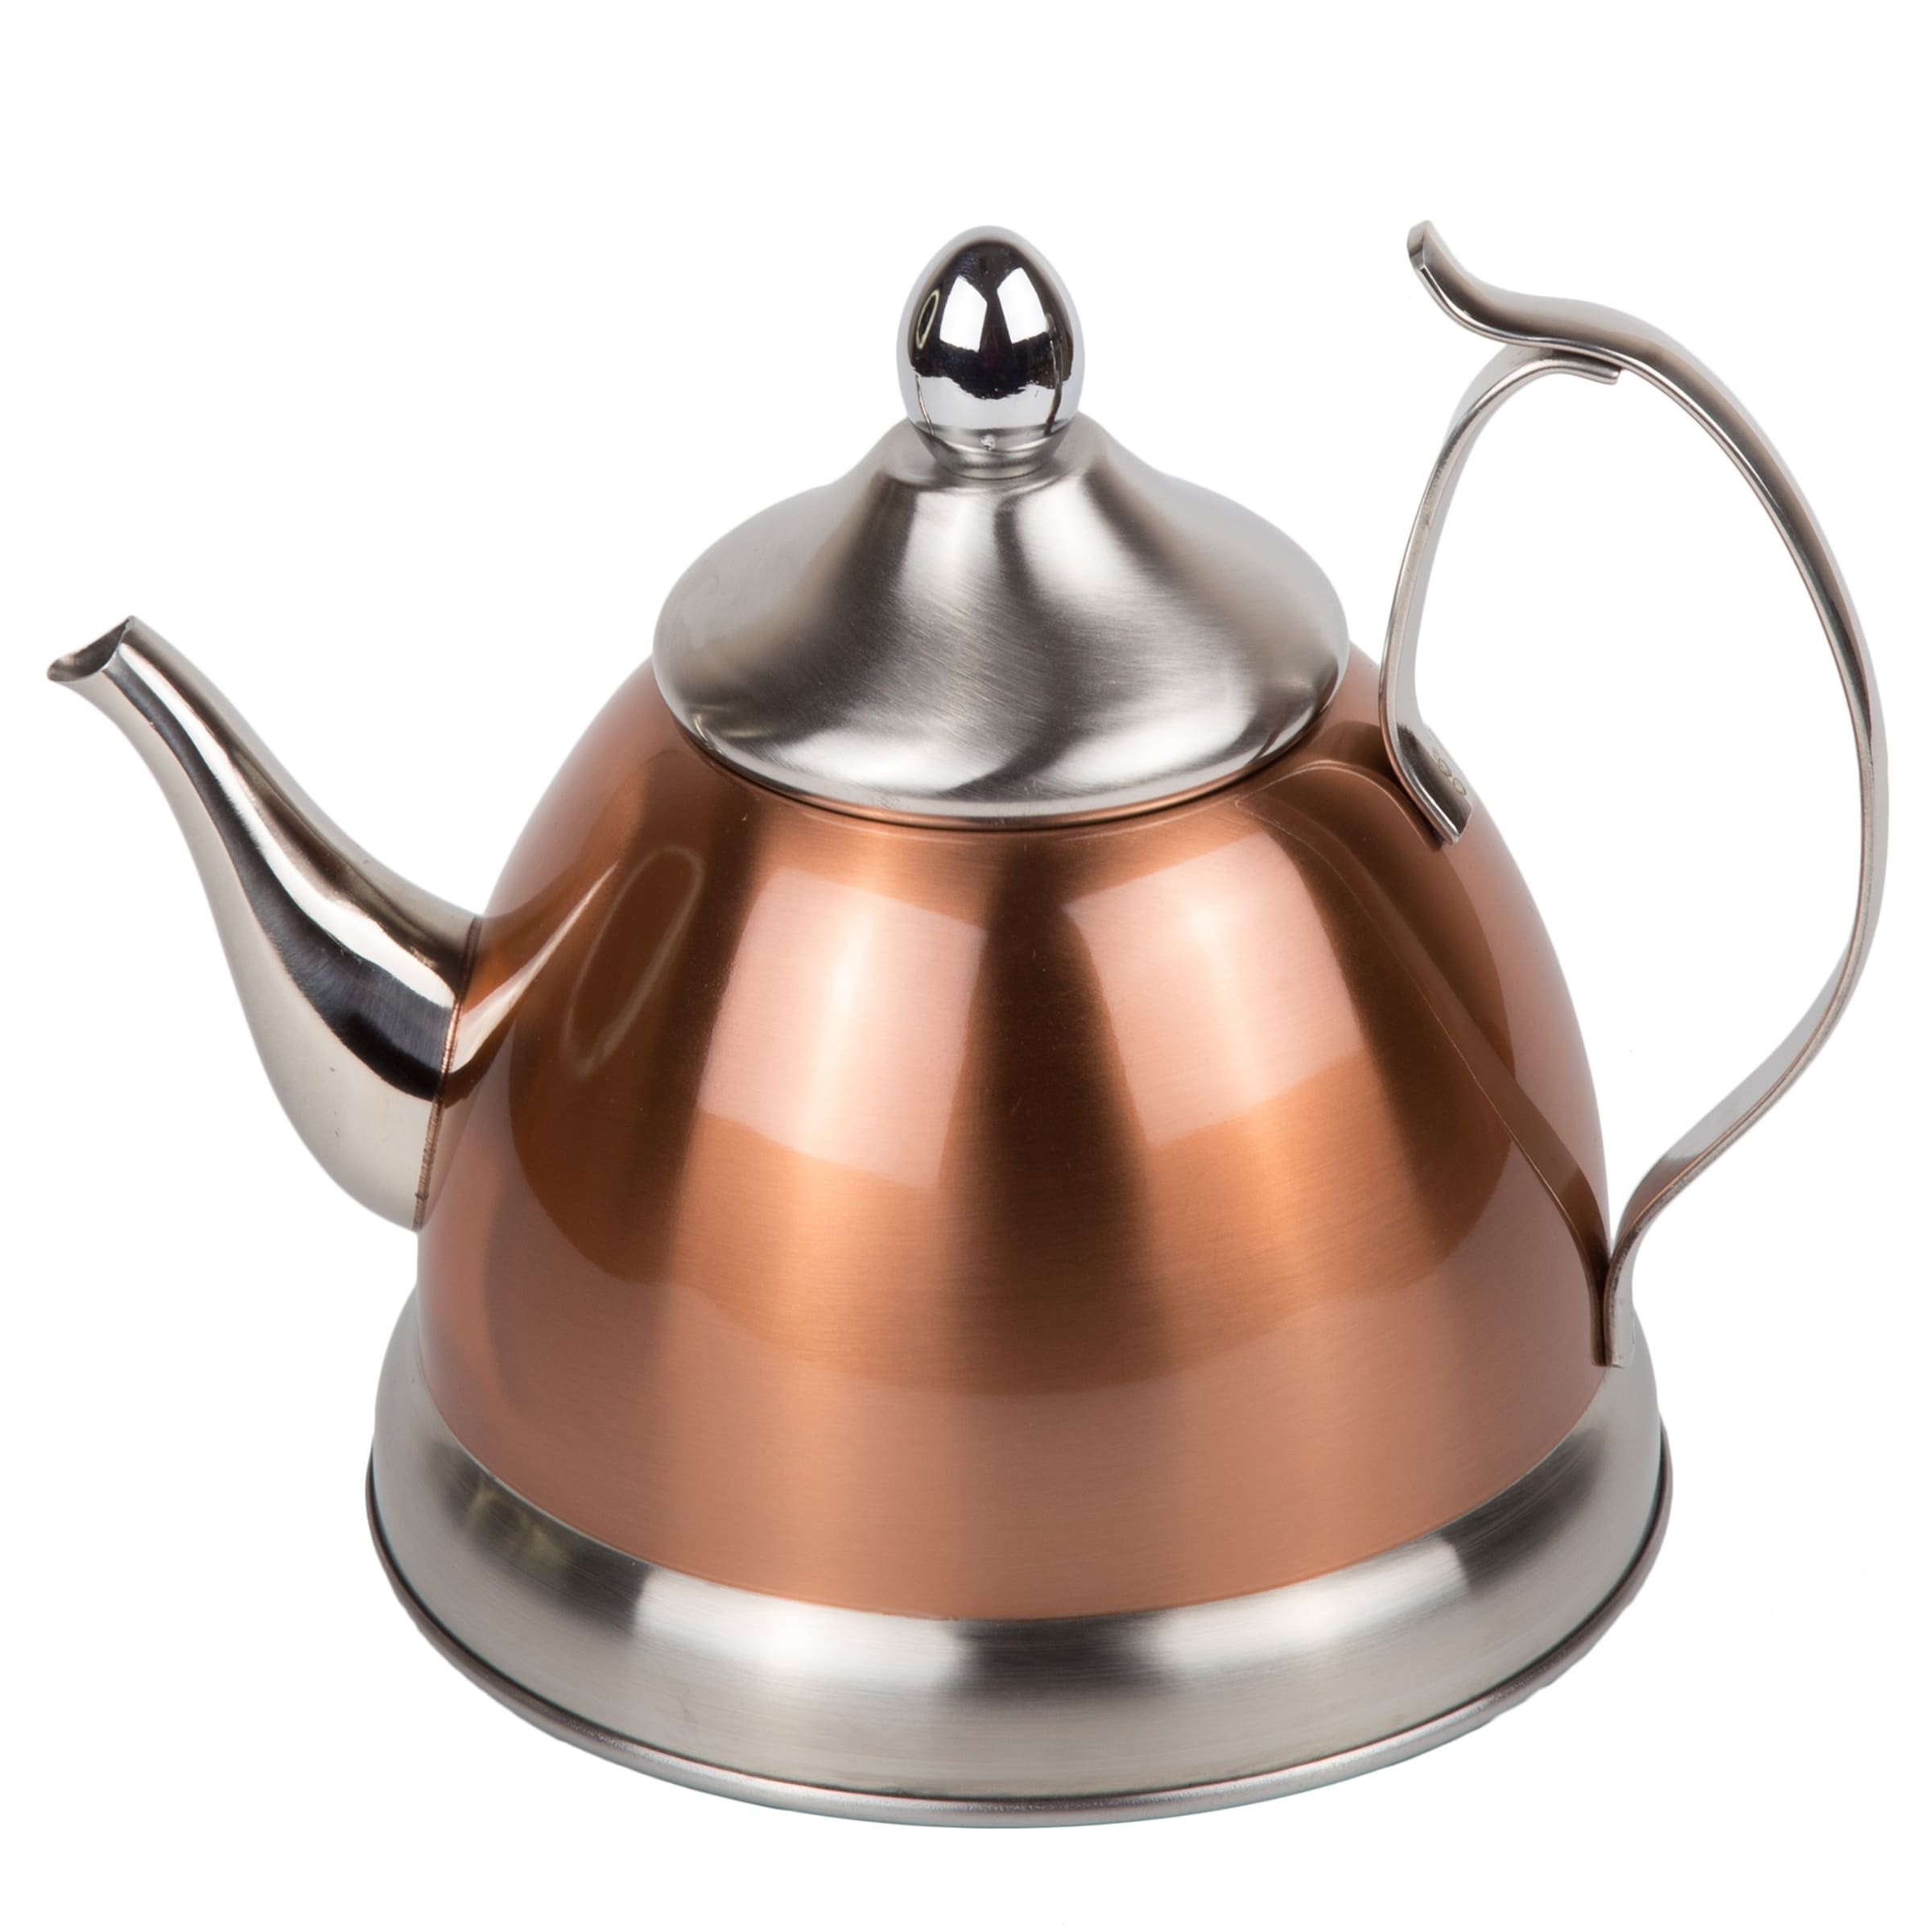 https://ak1.ostkcdn.com/images/products/30551788/Creative-Home-1.0-Qt.-Nobili-Stainless-Steel-Copper-Tea-Kettle-with-Removable-Infuser-Basket-f577fc64-abd8-49f3-827c-d036b05d67db.jpg